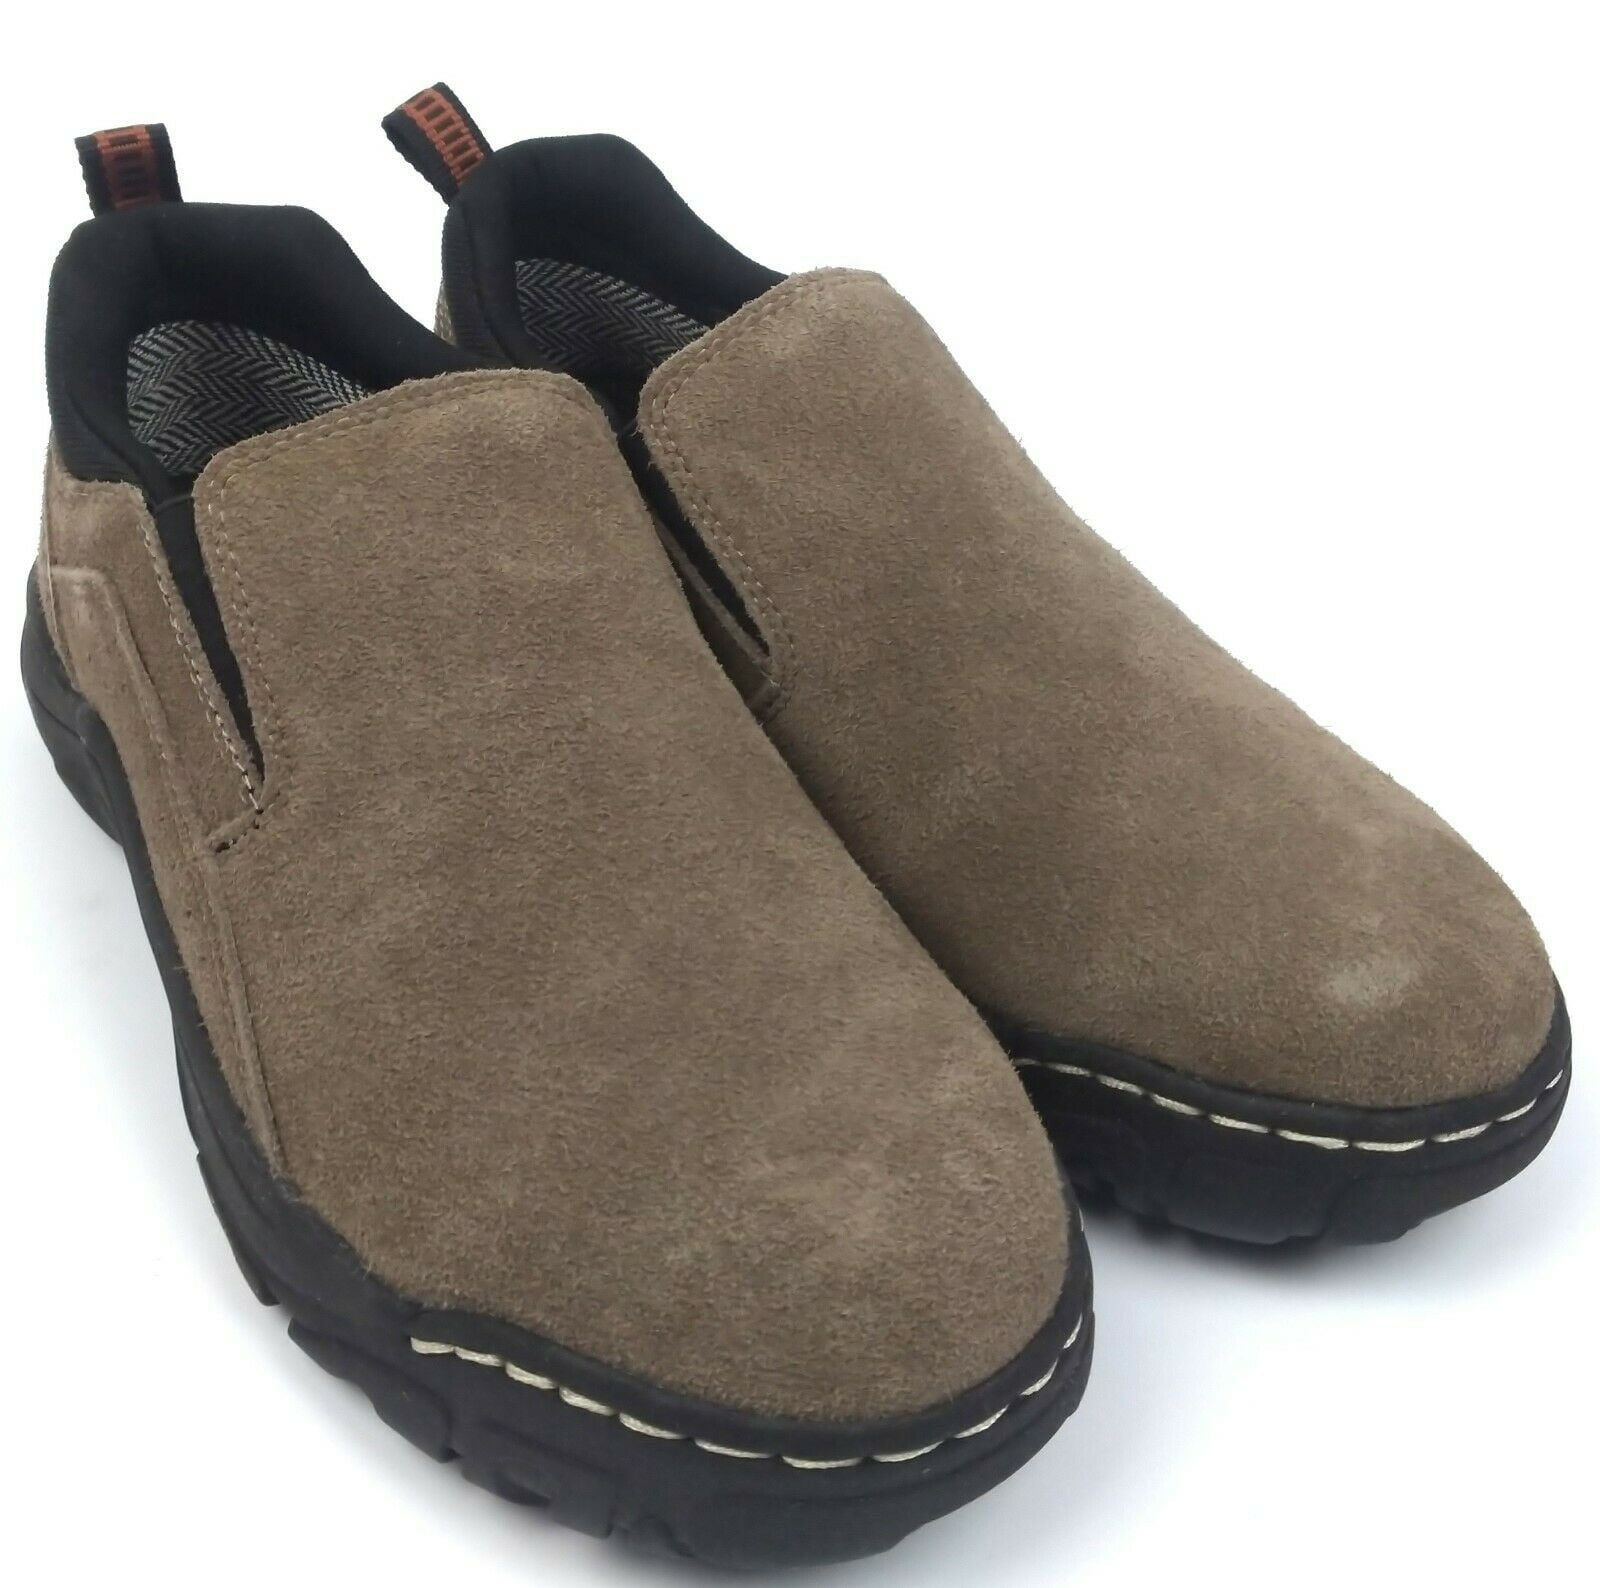 NEW Khombu Men's Liam Suede Slip On Water Resistant Shoes Brown Pick Size